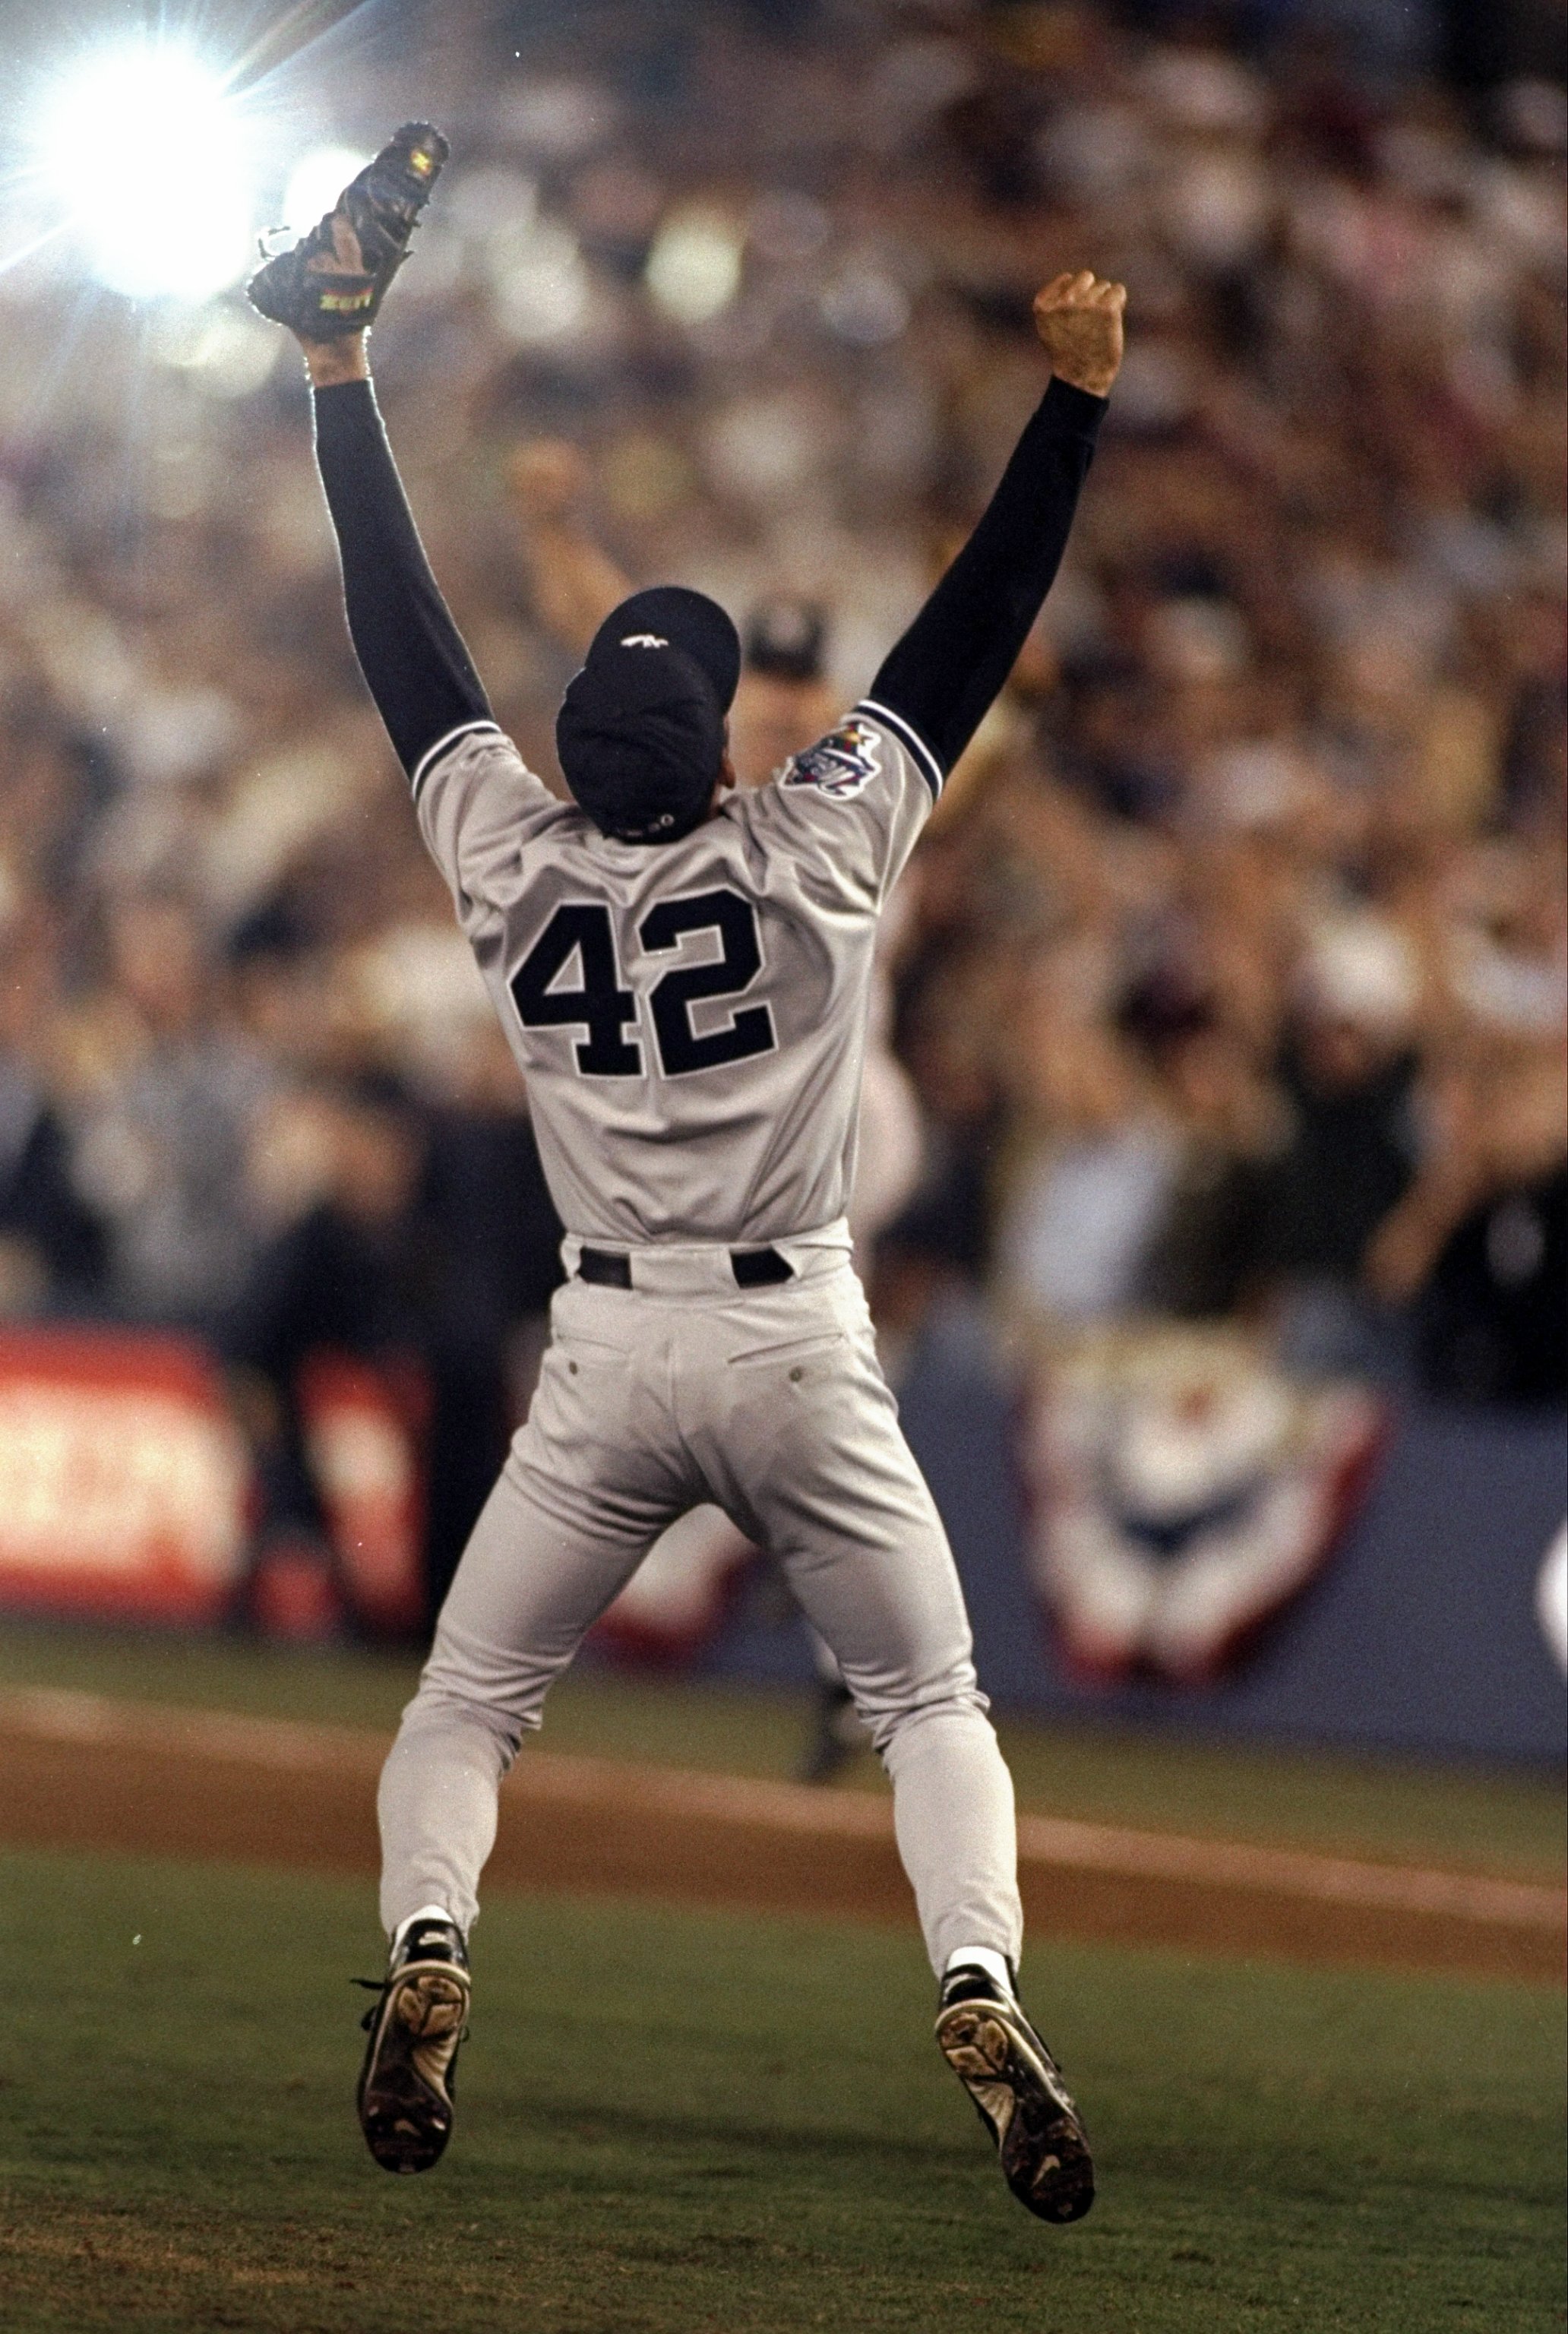 21 Oct 1998:  Pitcher Mariano Rivera #42 of the New York Yankees celebrates following the 1998 World Series Game 5 against the San Diego Padres at the Qualcomm Stadium in San Diego, California. The Yankees defeated the Padres 3-0 to win the World Series.